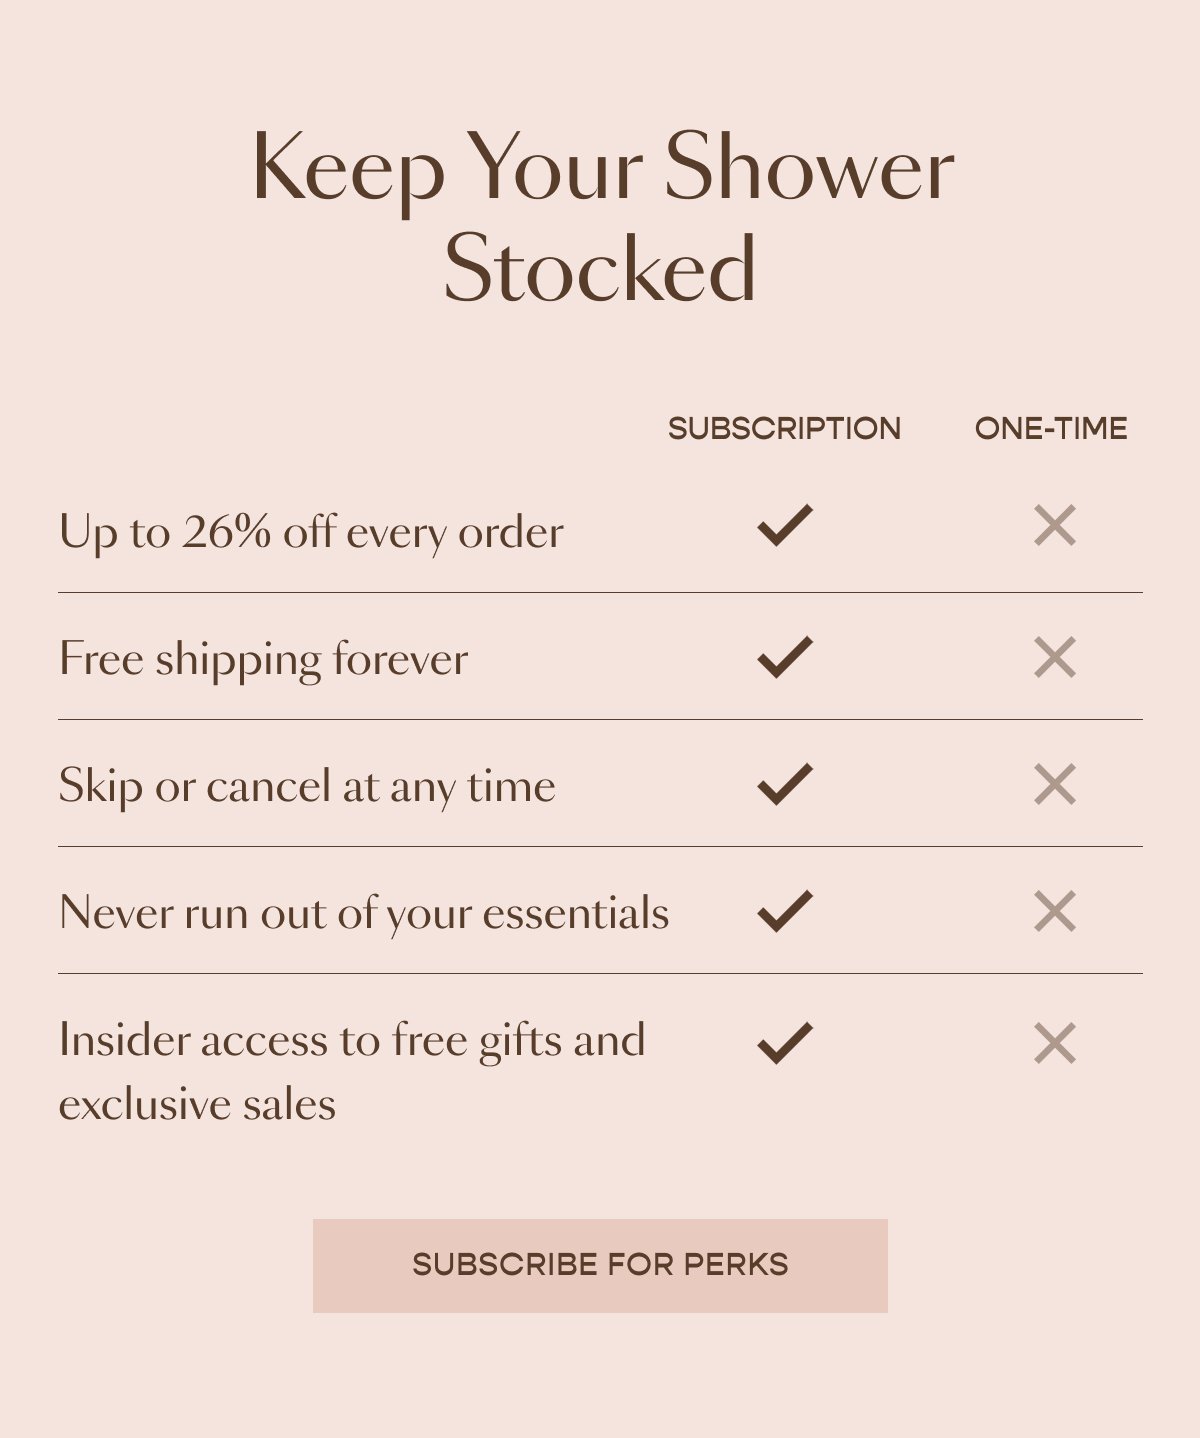 Keep your shower stocked